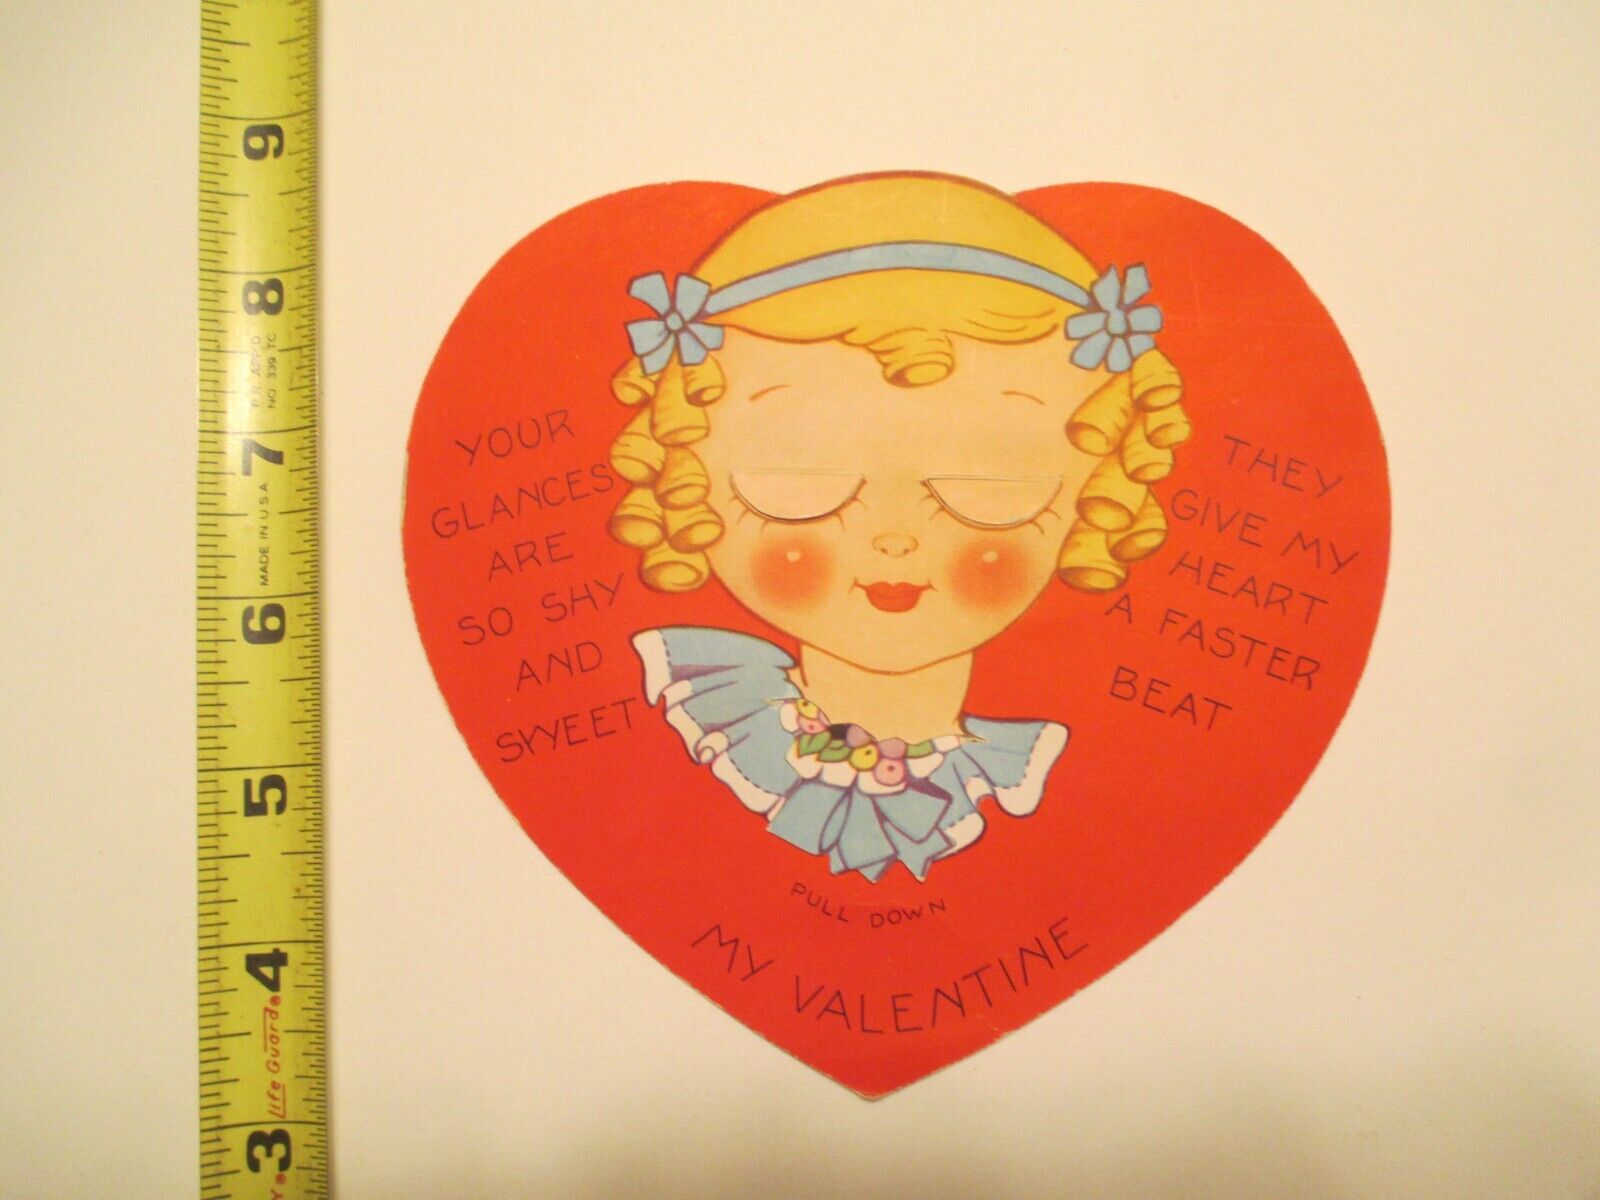 Vintage Valentine Glances are so shy sweet mechanical A131